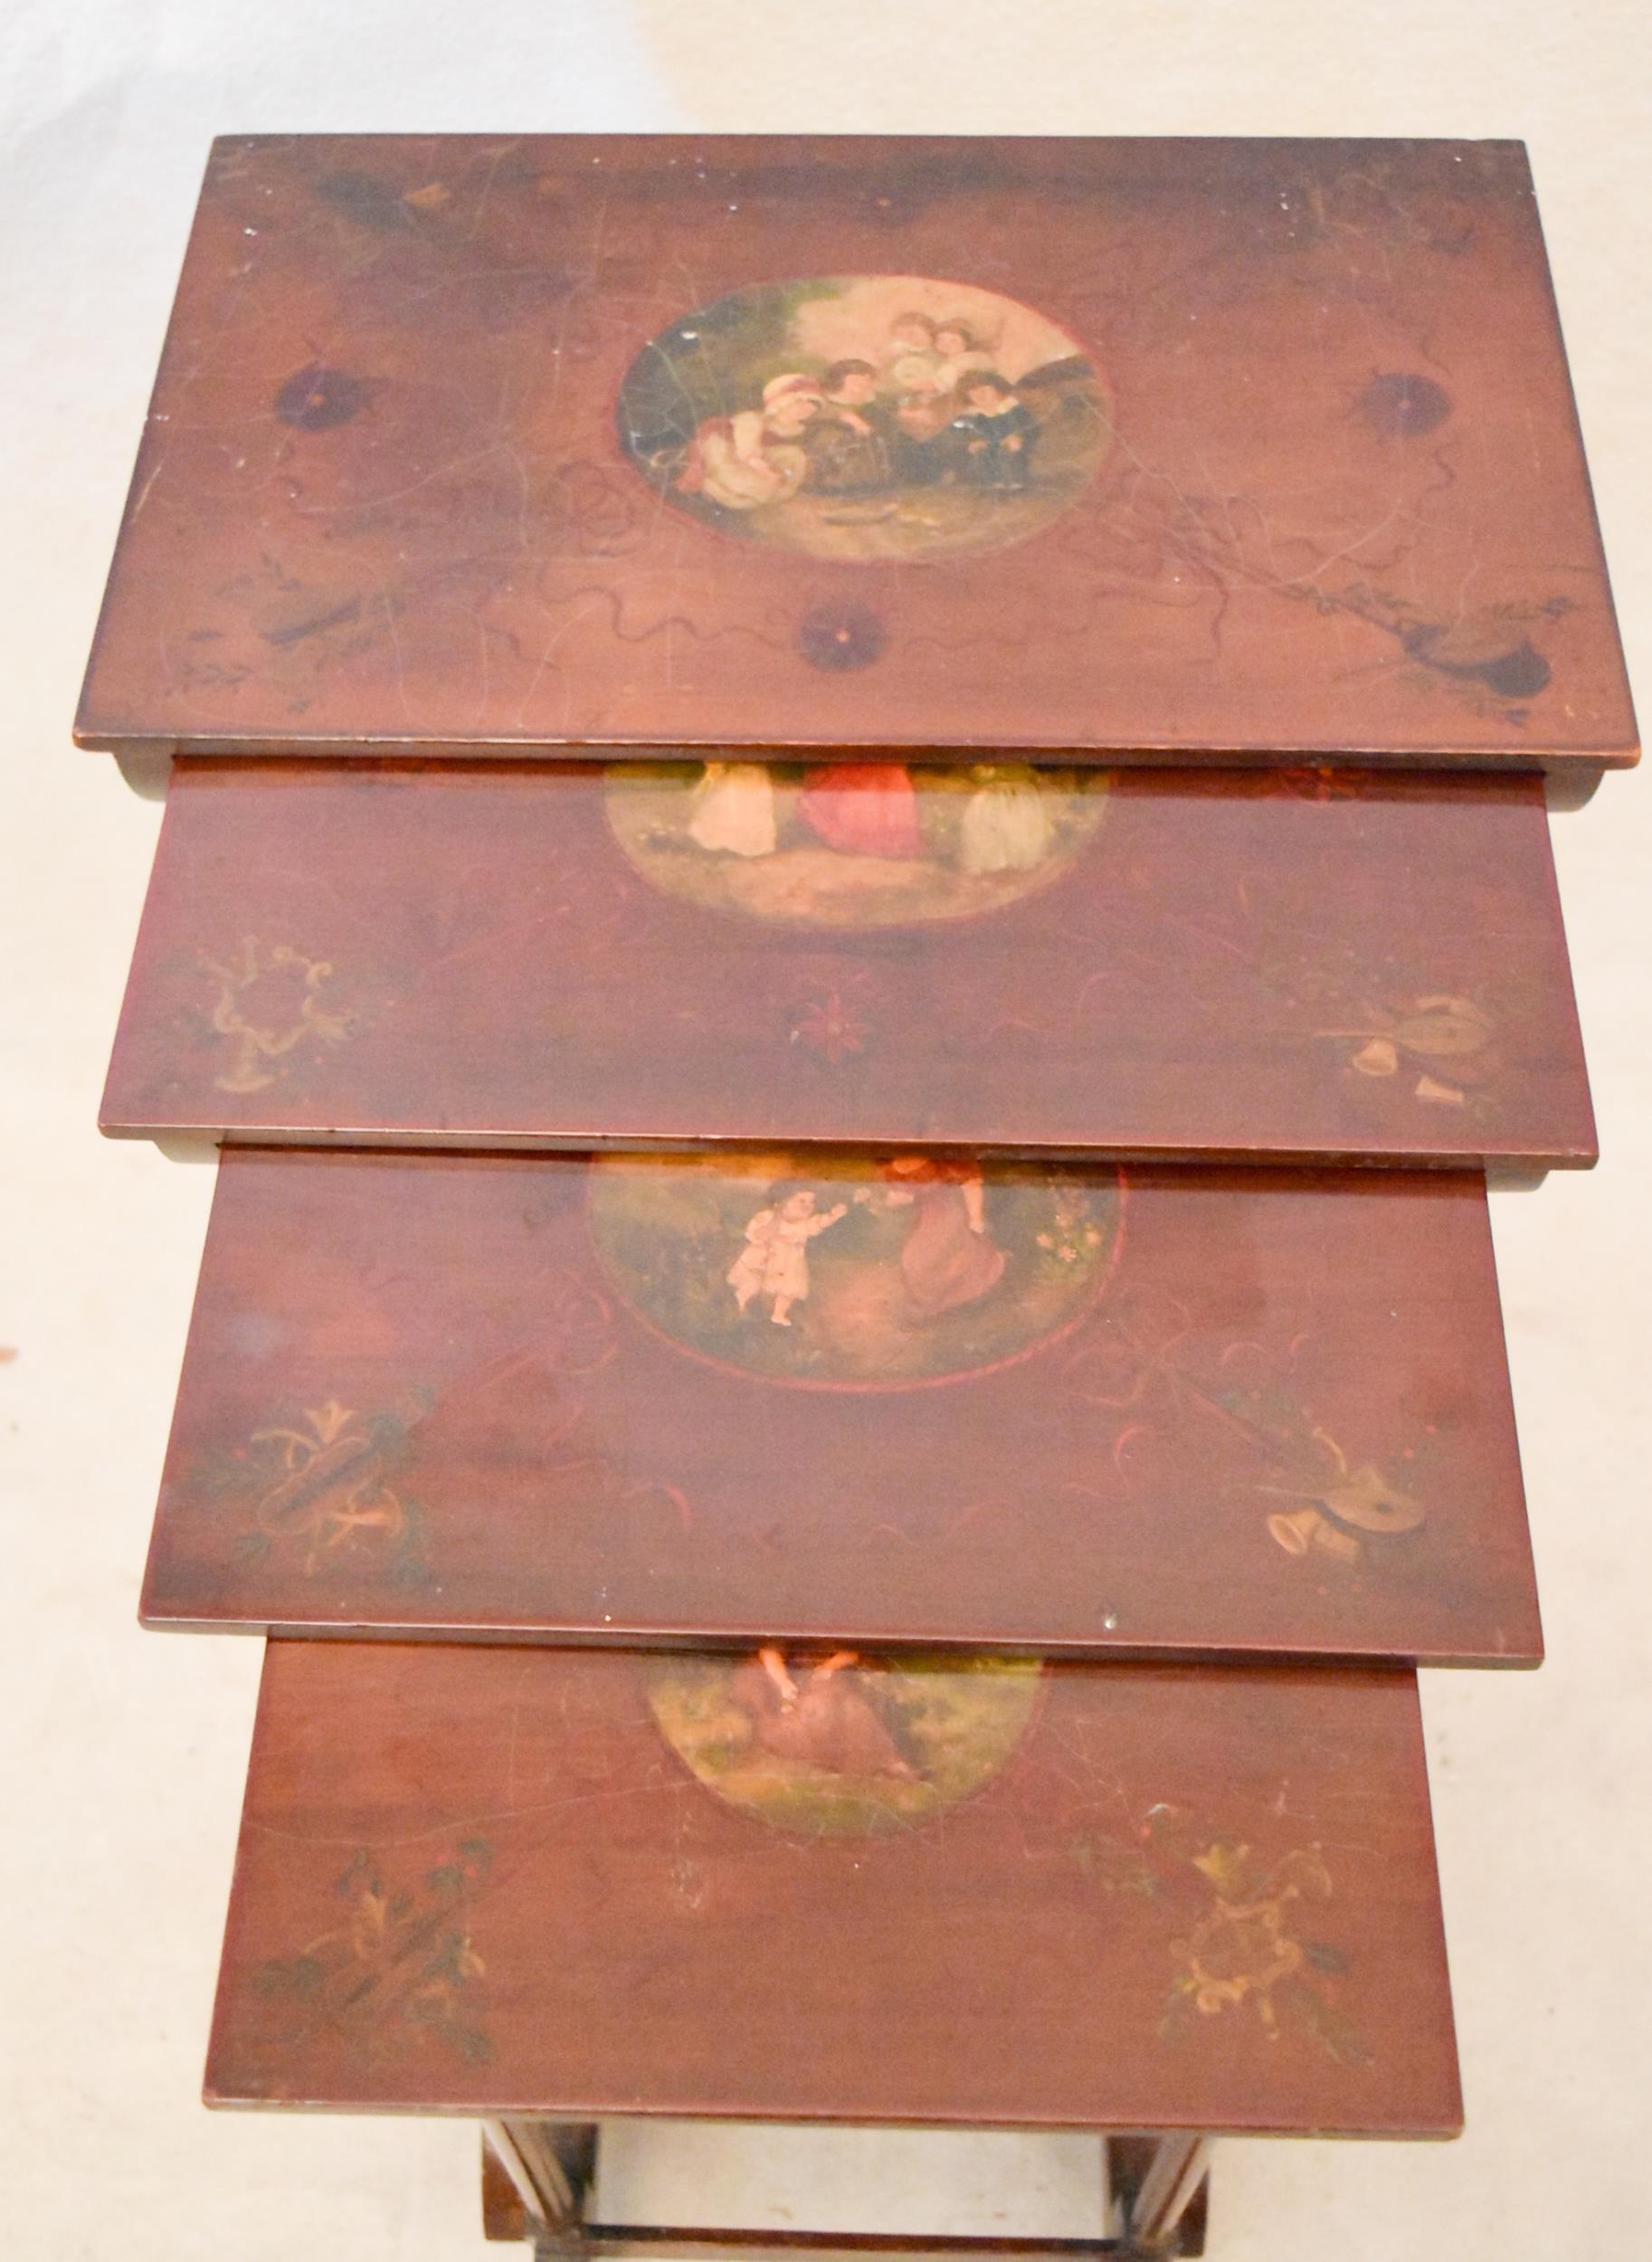 A quartetto nest of Regency style mahogany tables, each with rectangular tops hand painted with a - Image 4 of 5